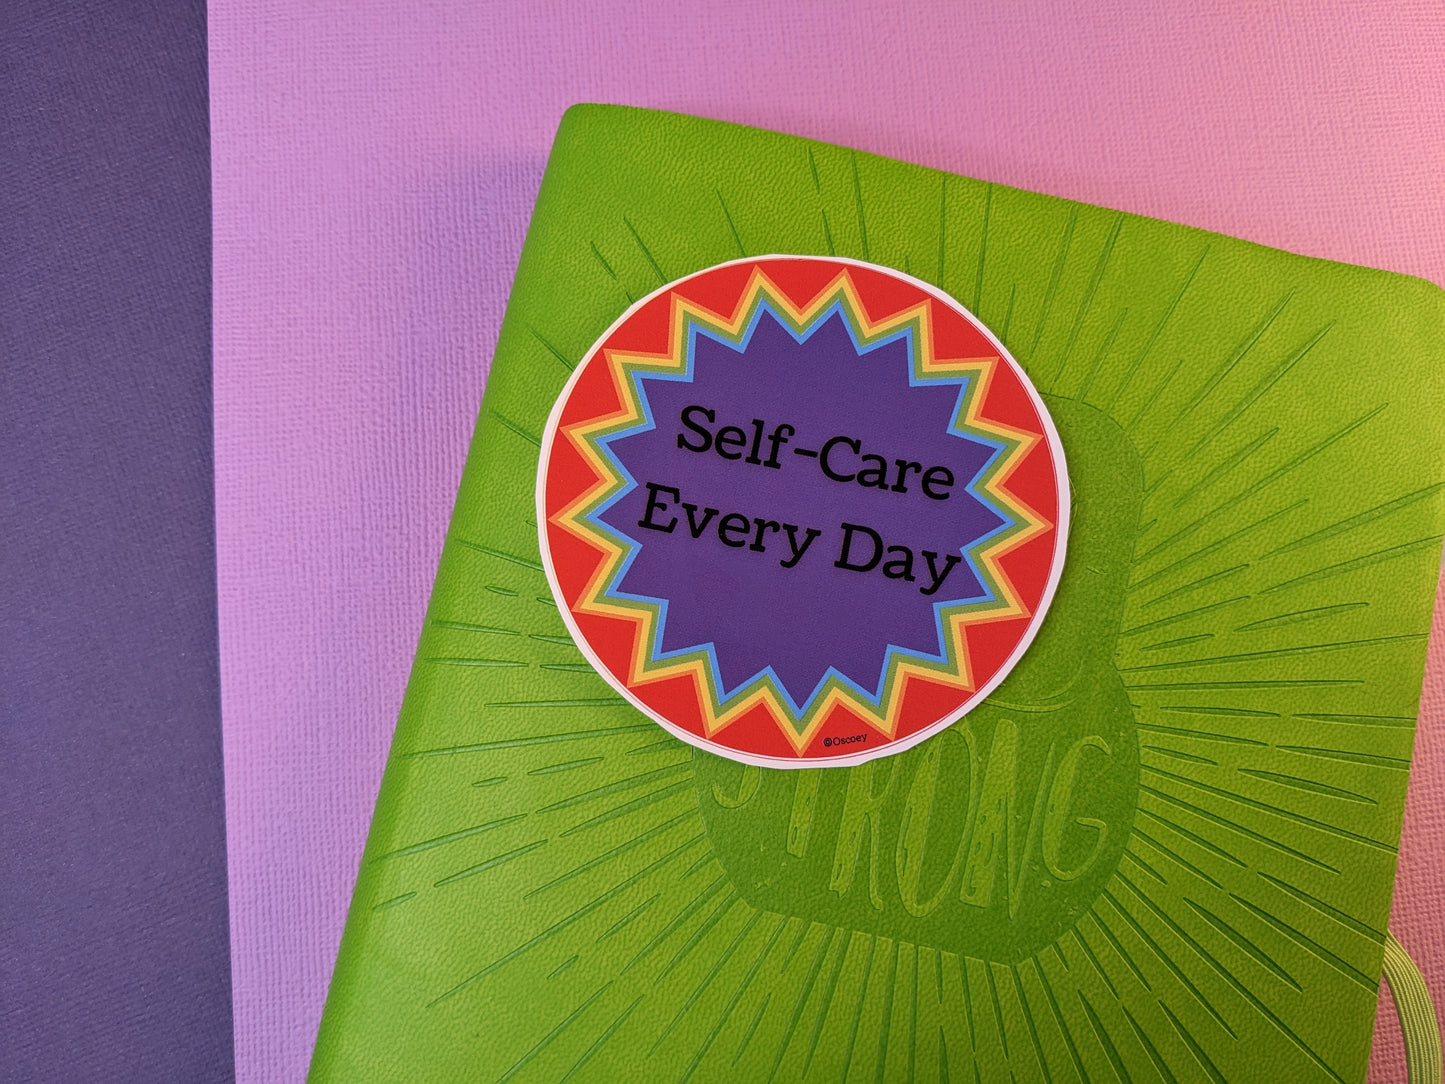 3" Round Self-Care Every Day Solid Rainbow Sticker